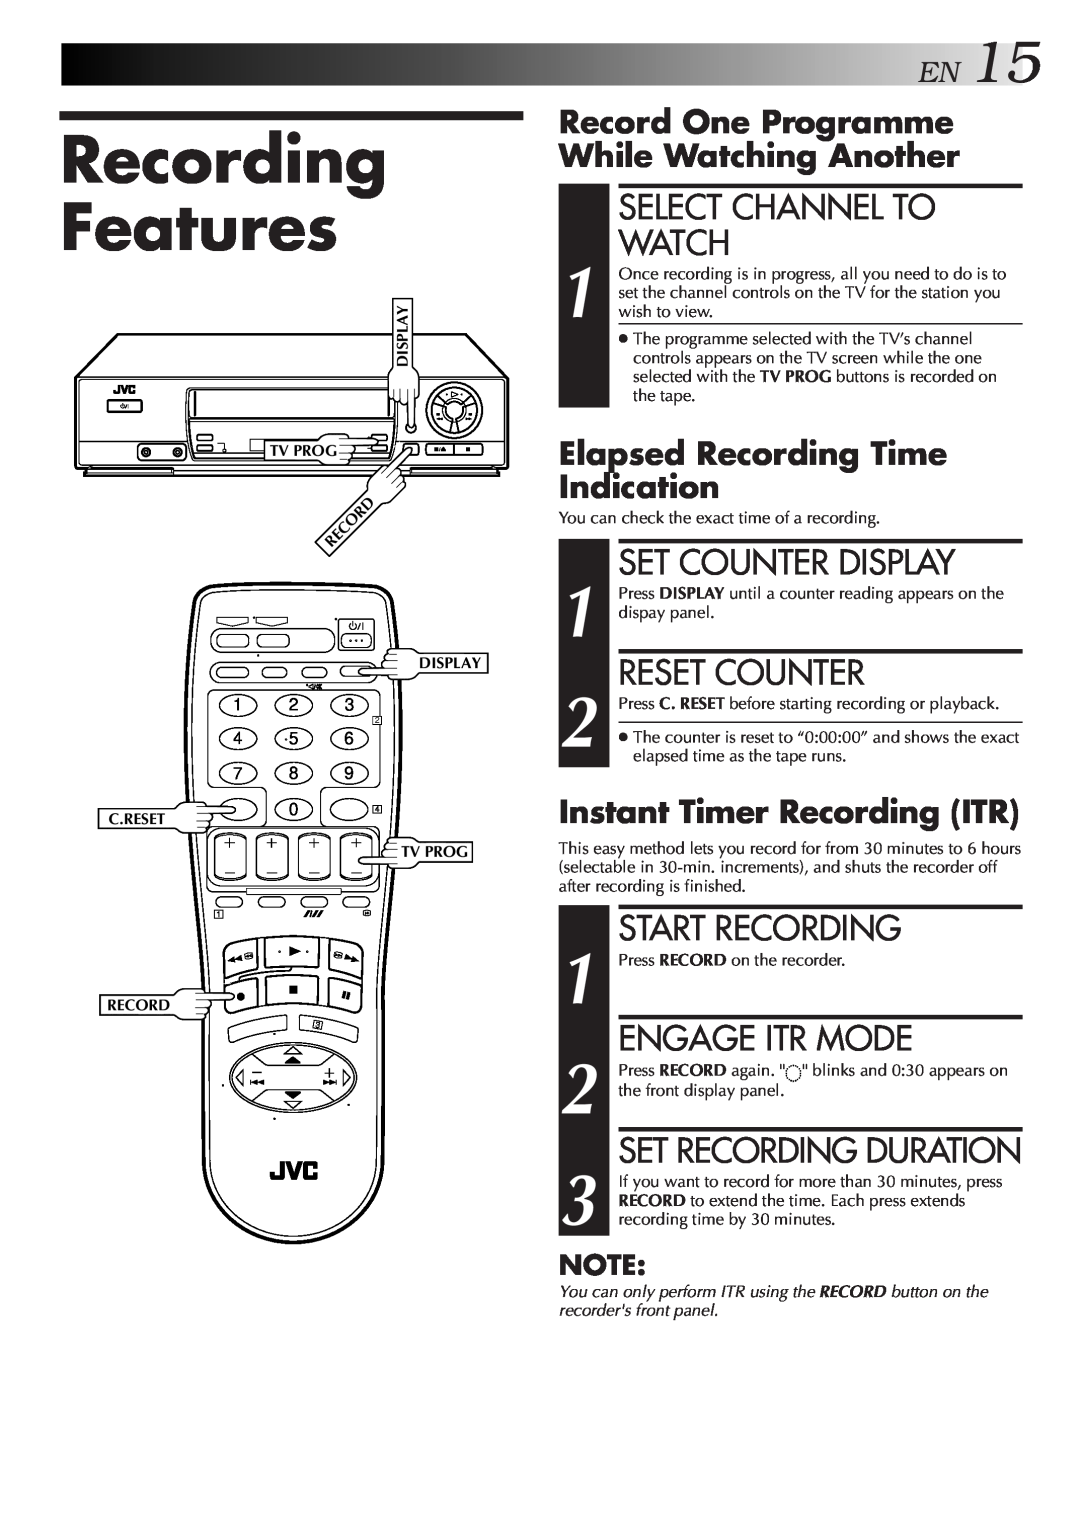 JVC HR-J455EA Recording Features, EN15, Select Channel To Watch, Set Counter Display, Reset Counter, Engage Itr Mode 